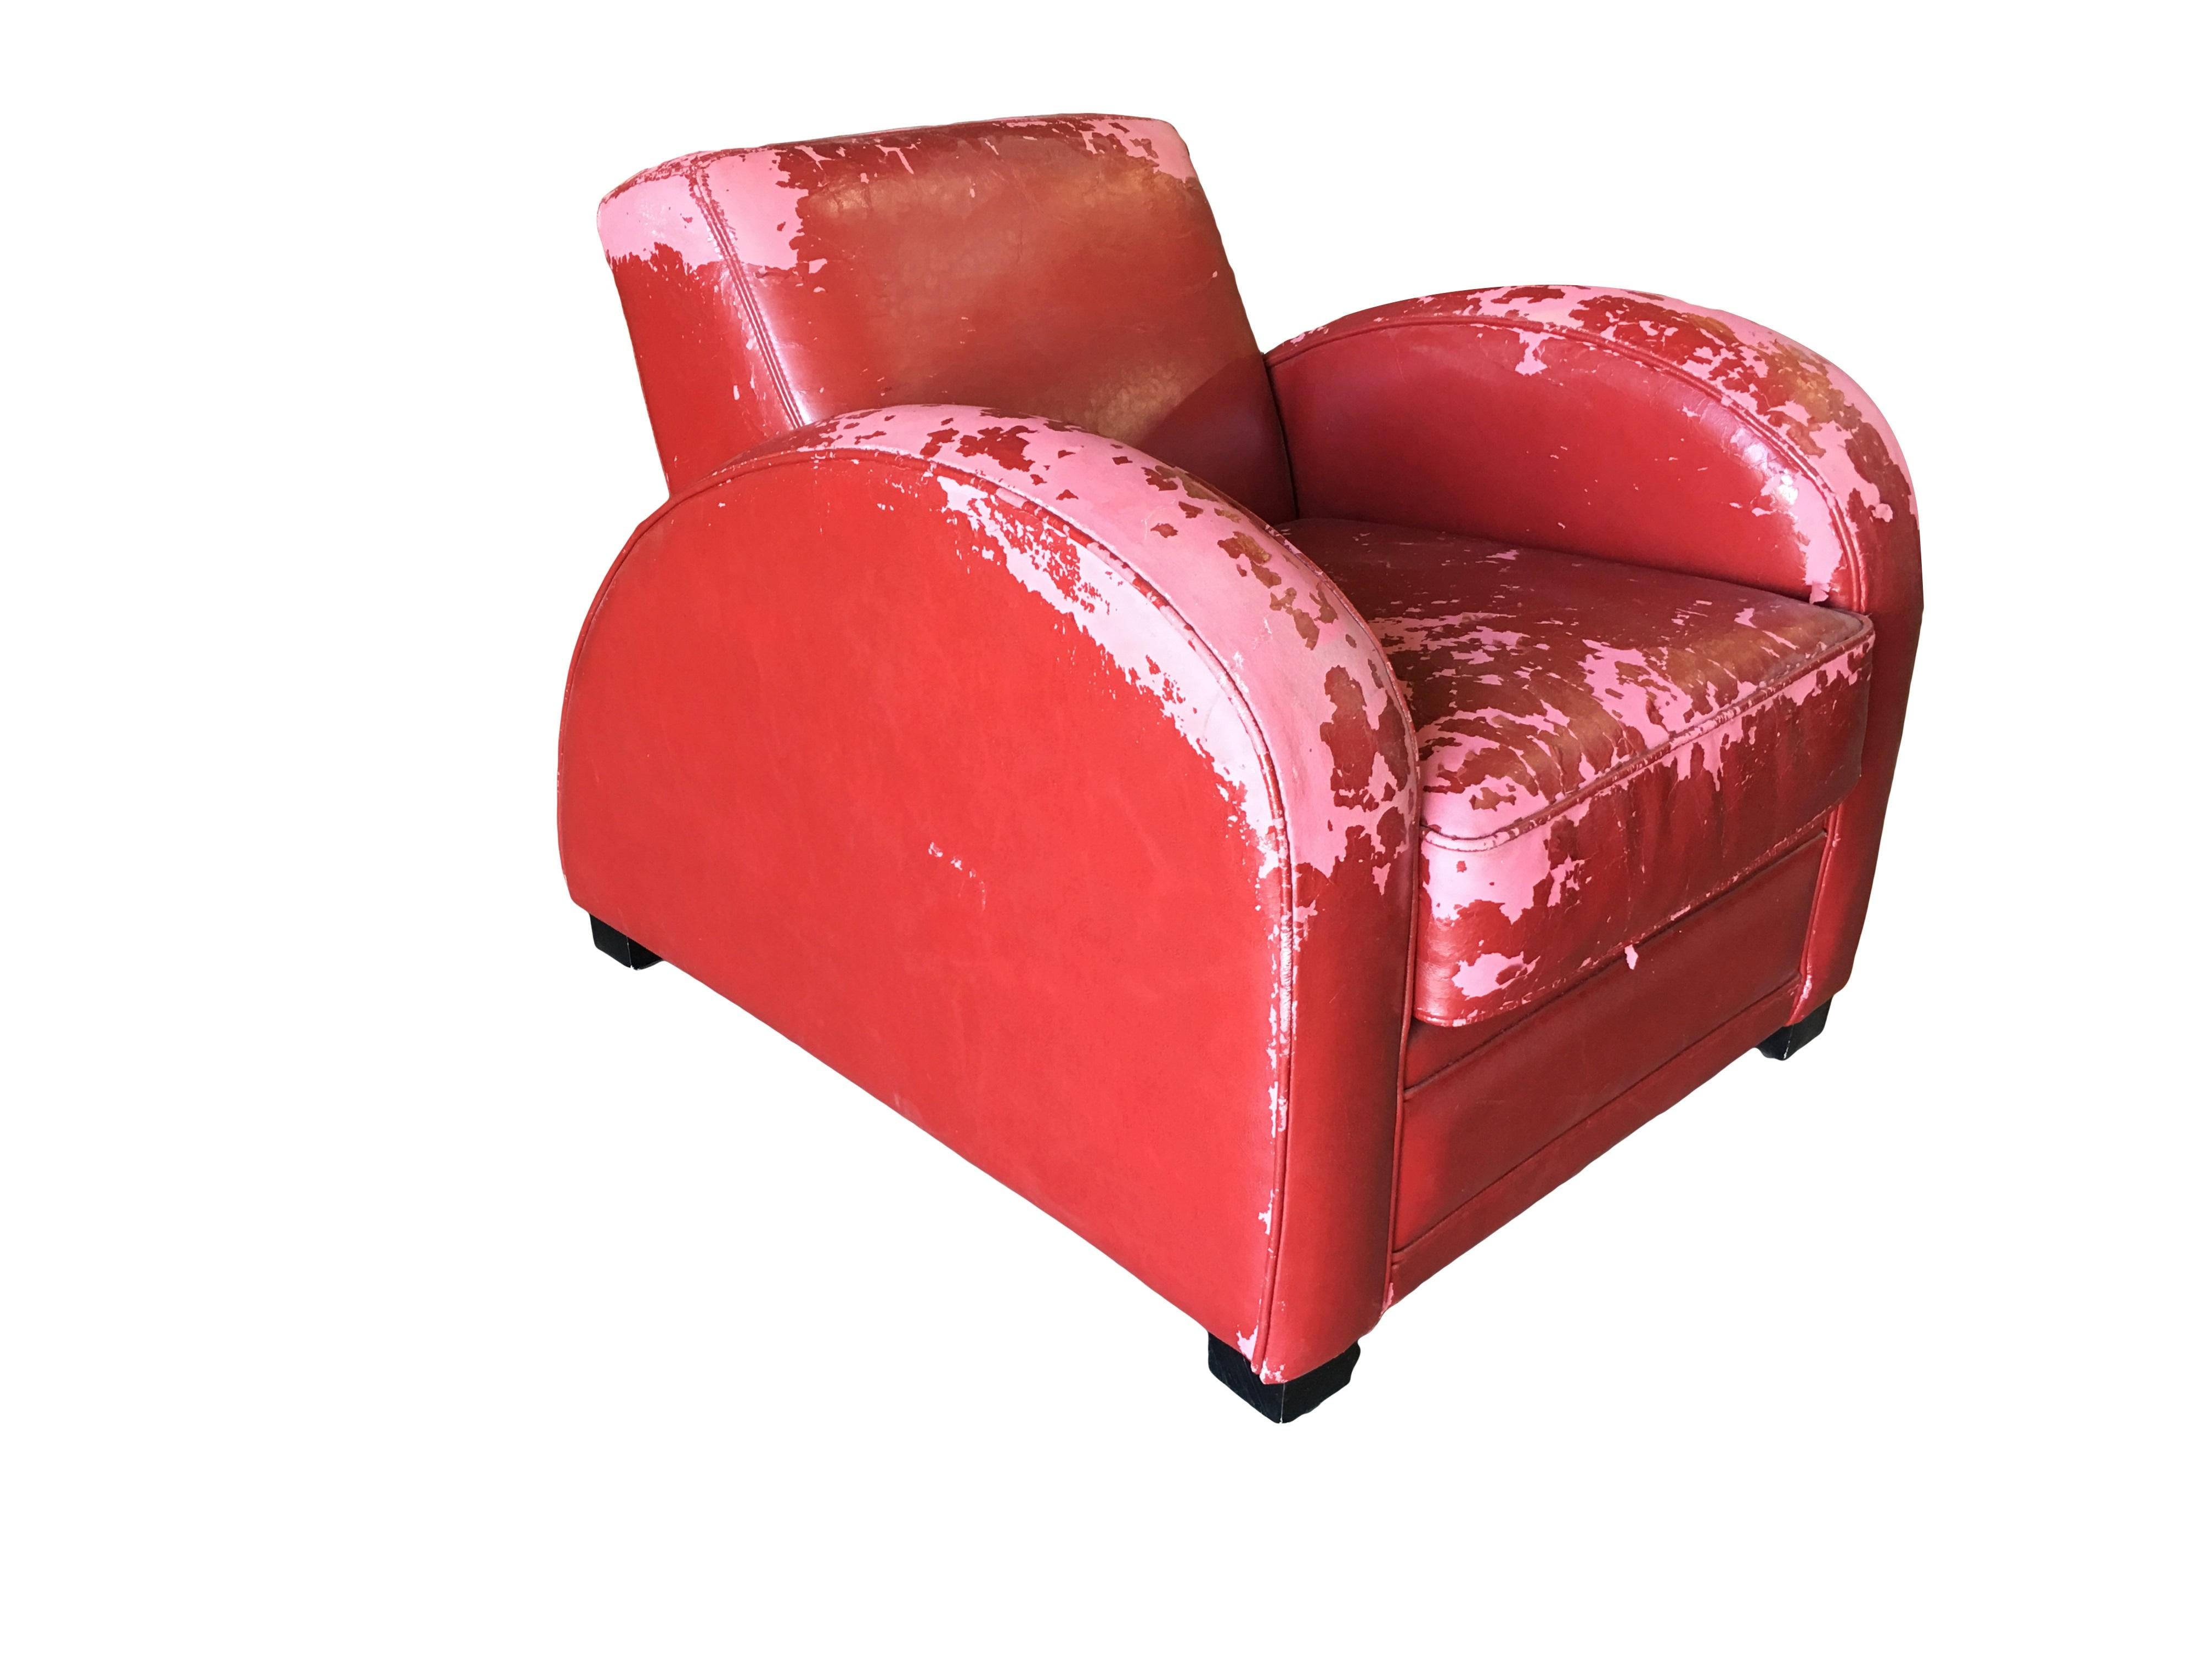 Pair of Art Deco jazz club lounge chairs finished in red vinyl covers w/ streamline speed arms. The surface of the cushion covers show strong wear and will need to recovered.